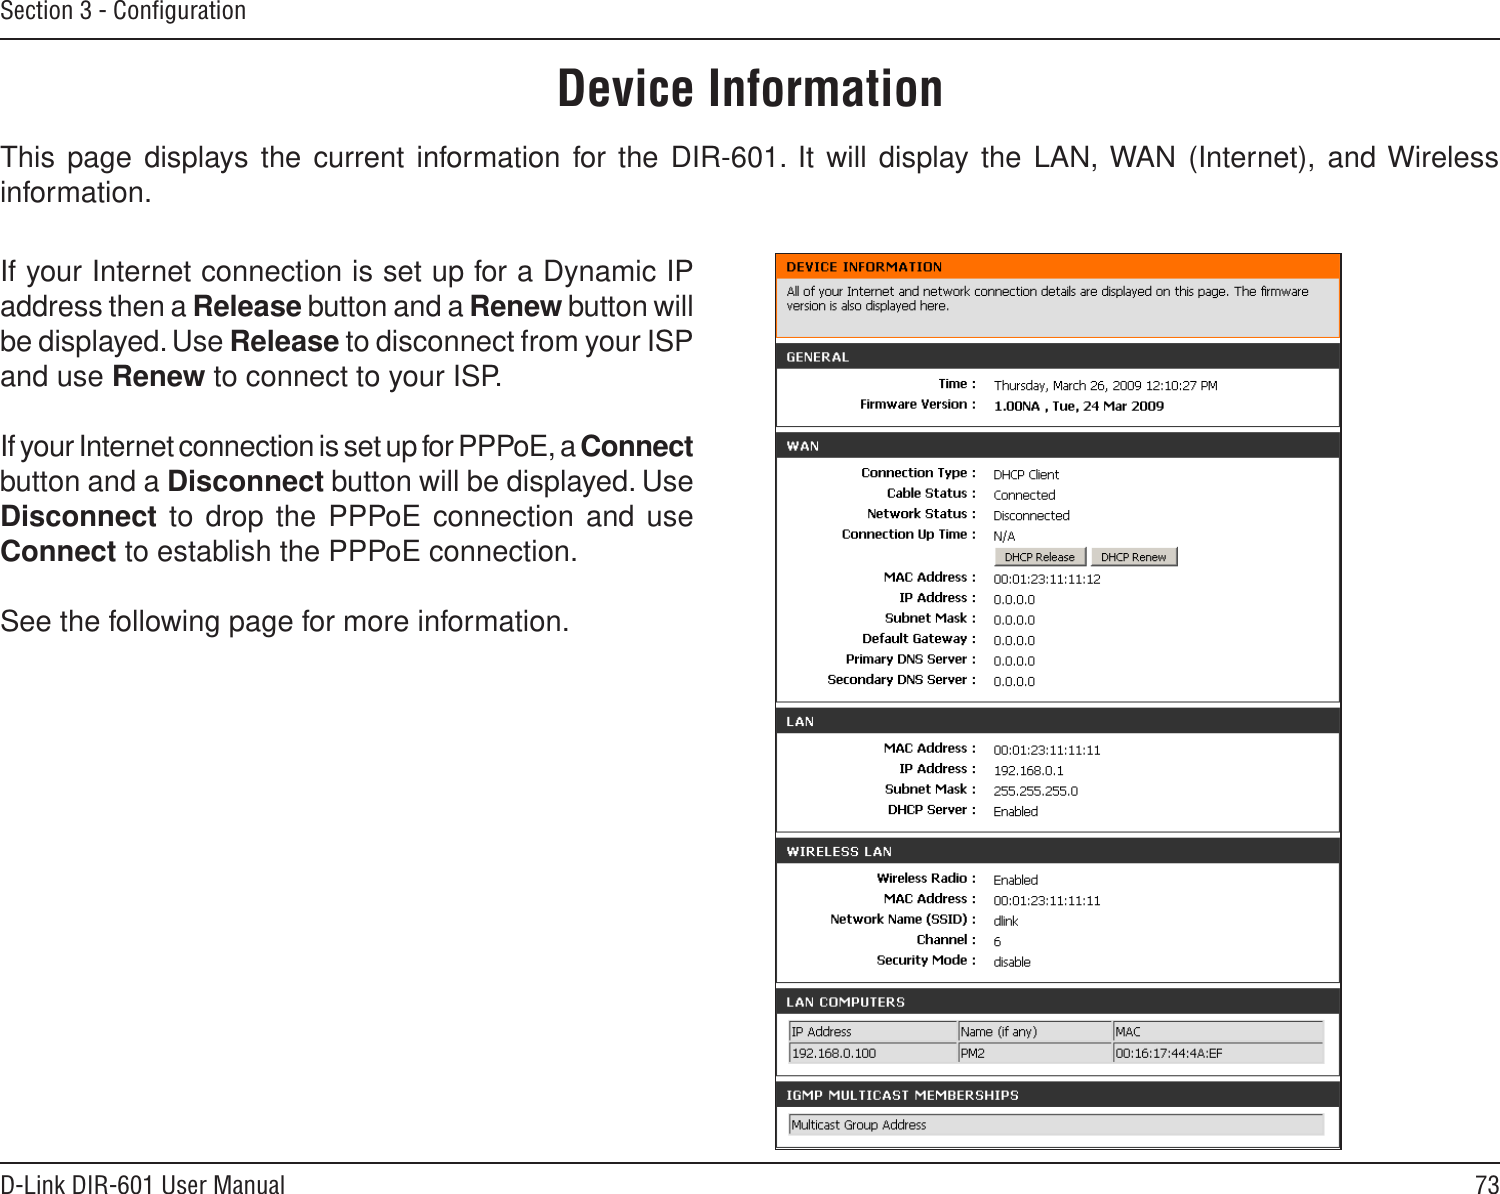 73D-Link DIR-601 User ManualSection 3 - ConﬁgurationThis page displays the current information for the DIR-601. It will display the  LAN, WAN (Internet), and Wireless information.Device InformationIf your Internet connection is set up for a Dynamic IP address then a Release button and a Renew button will be displayed. Use Release to disconnect from your ISP and use Renew to connect to your ISP. If your Internet connection is set up for PPPoE, a Connect button and a Disconnect button will be displayed. Use Disconnect to drop the PPPoE connection and use Connect to establish the PPPoE connection.See the following page for more information.